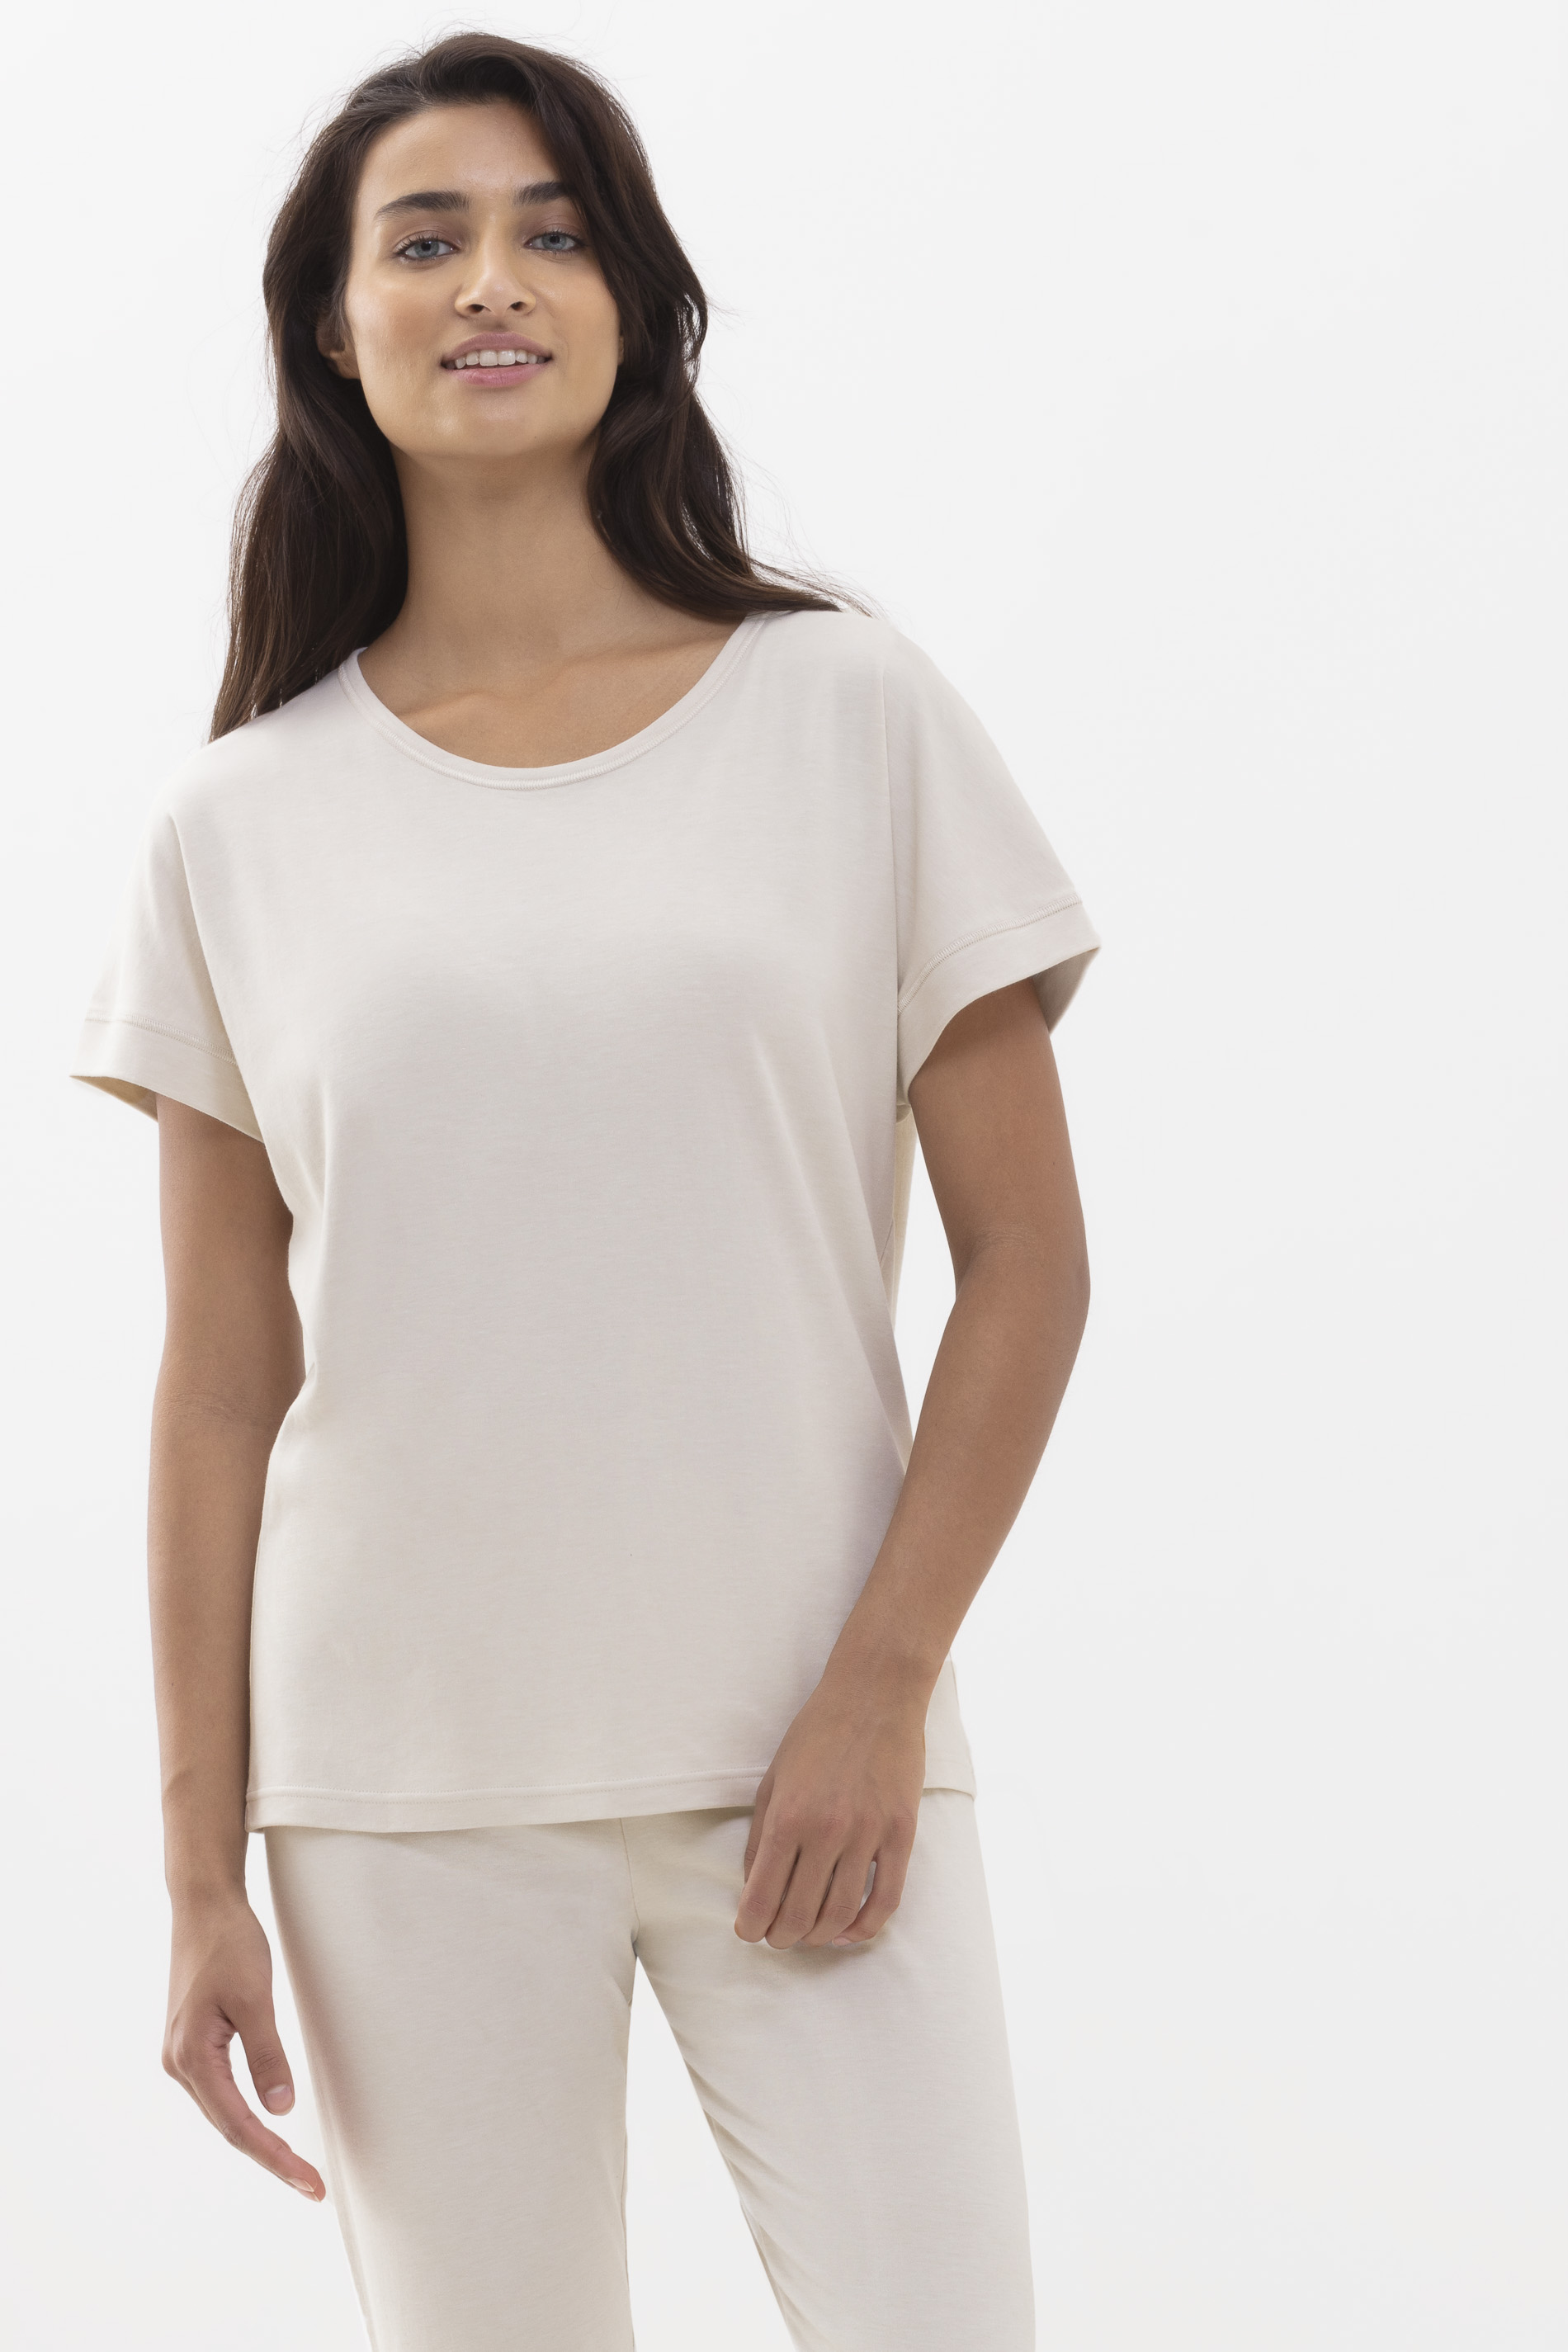 Shirt with half sleeves Natural Serie N8TEX 2.0 Front View | mey®